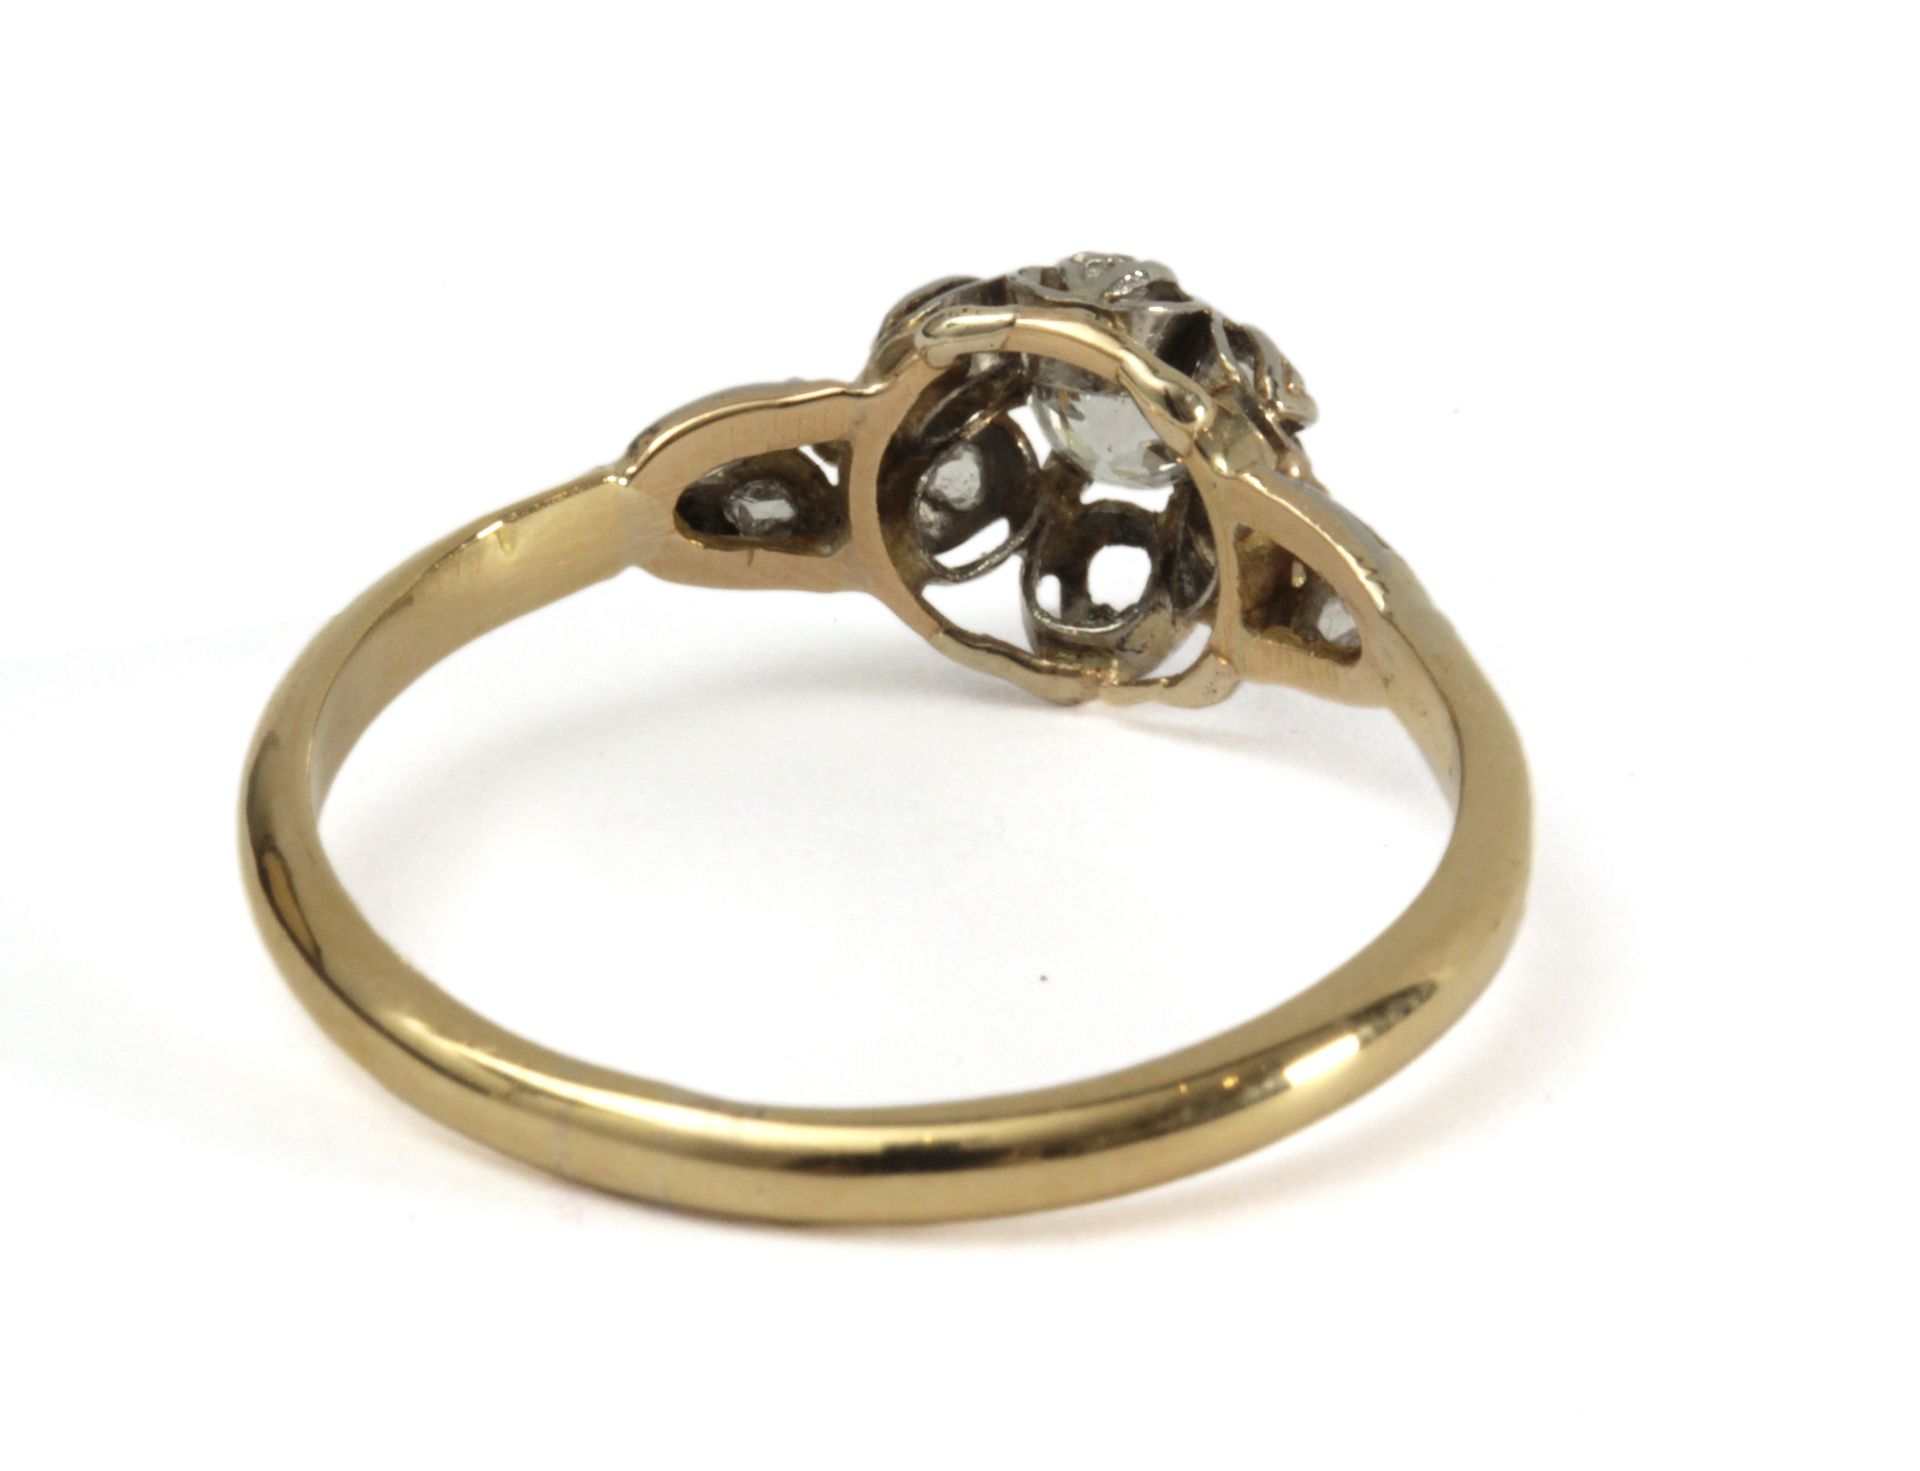 A first half of 20th century diamond ring with an 18 k. yellow gold setting - Image 3 of 3